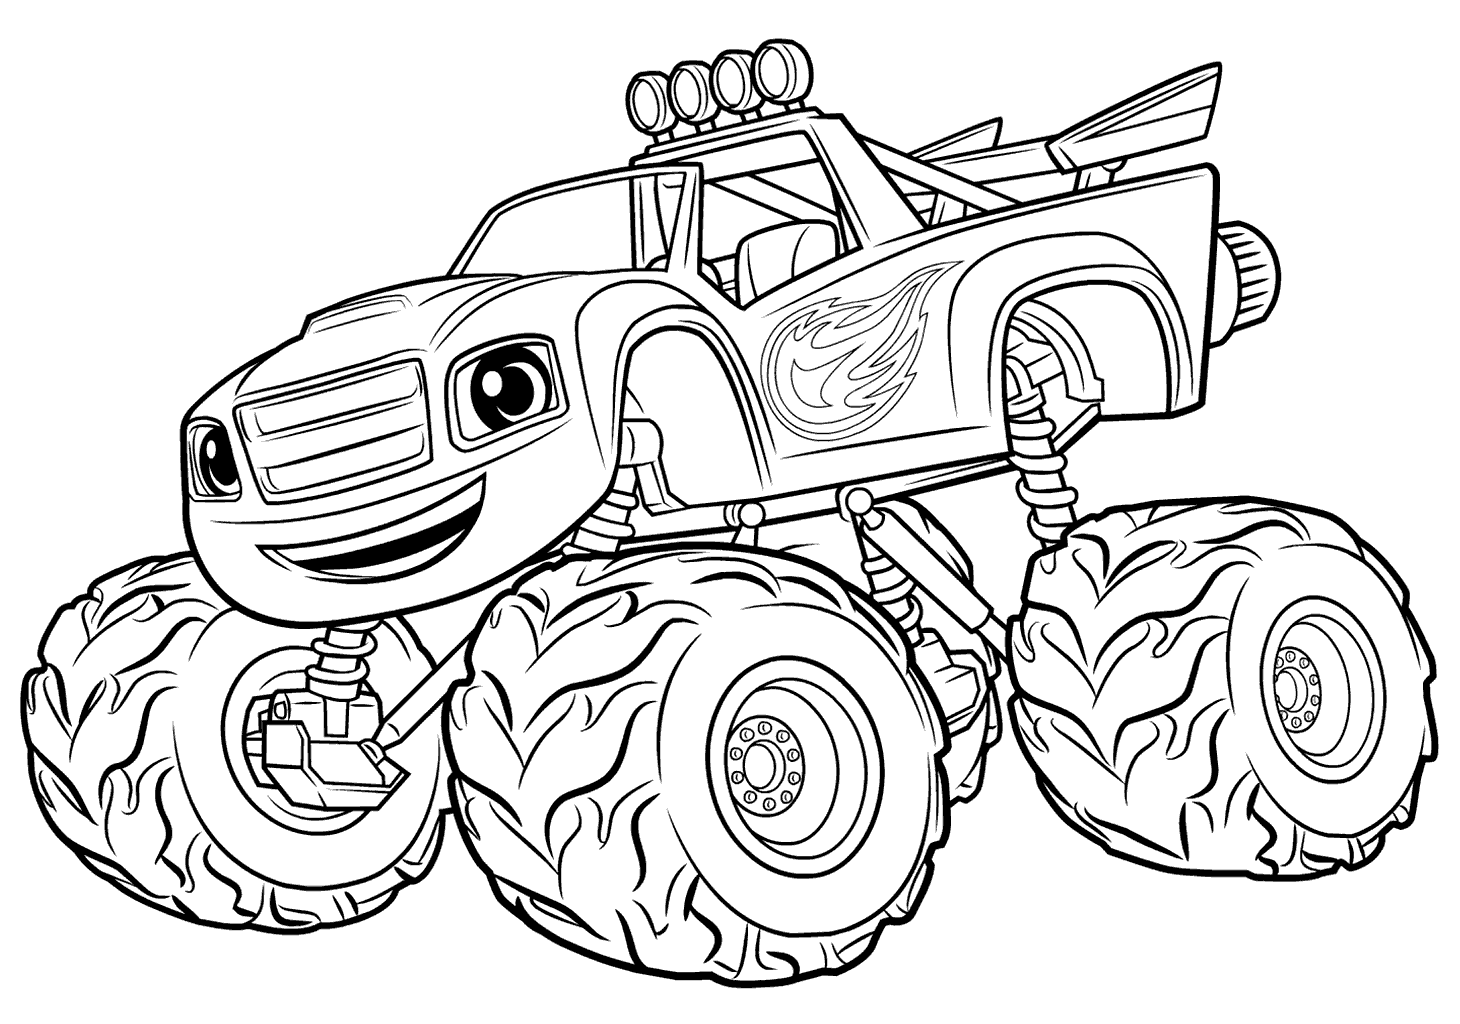 blaze-and-the-monster-machines-coloring-pages-best-coloring-pages-for